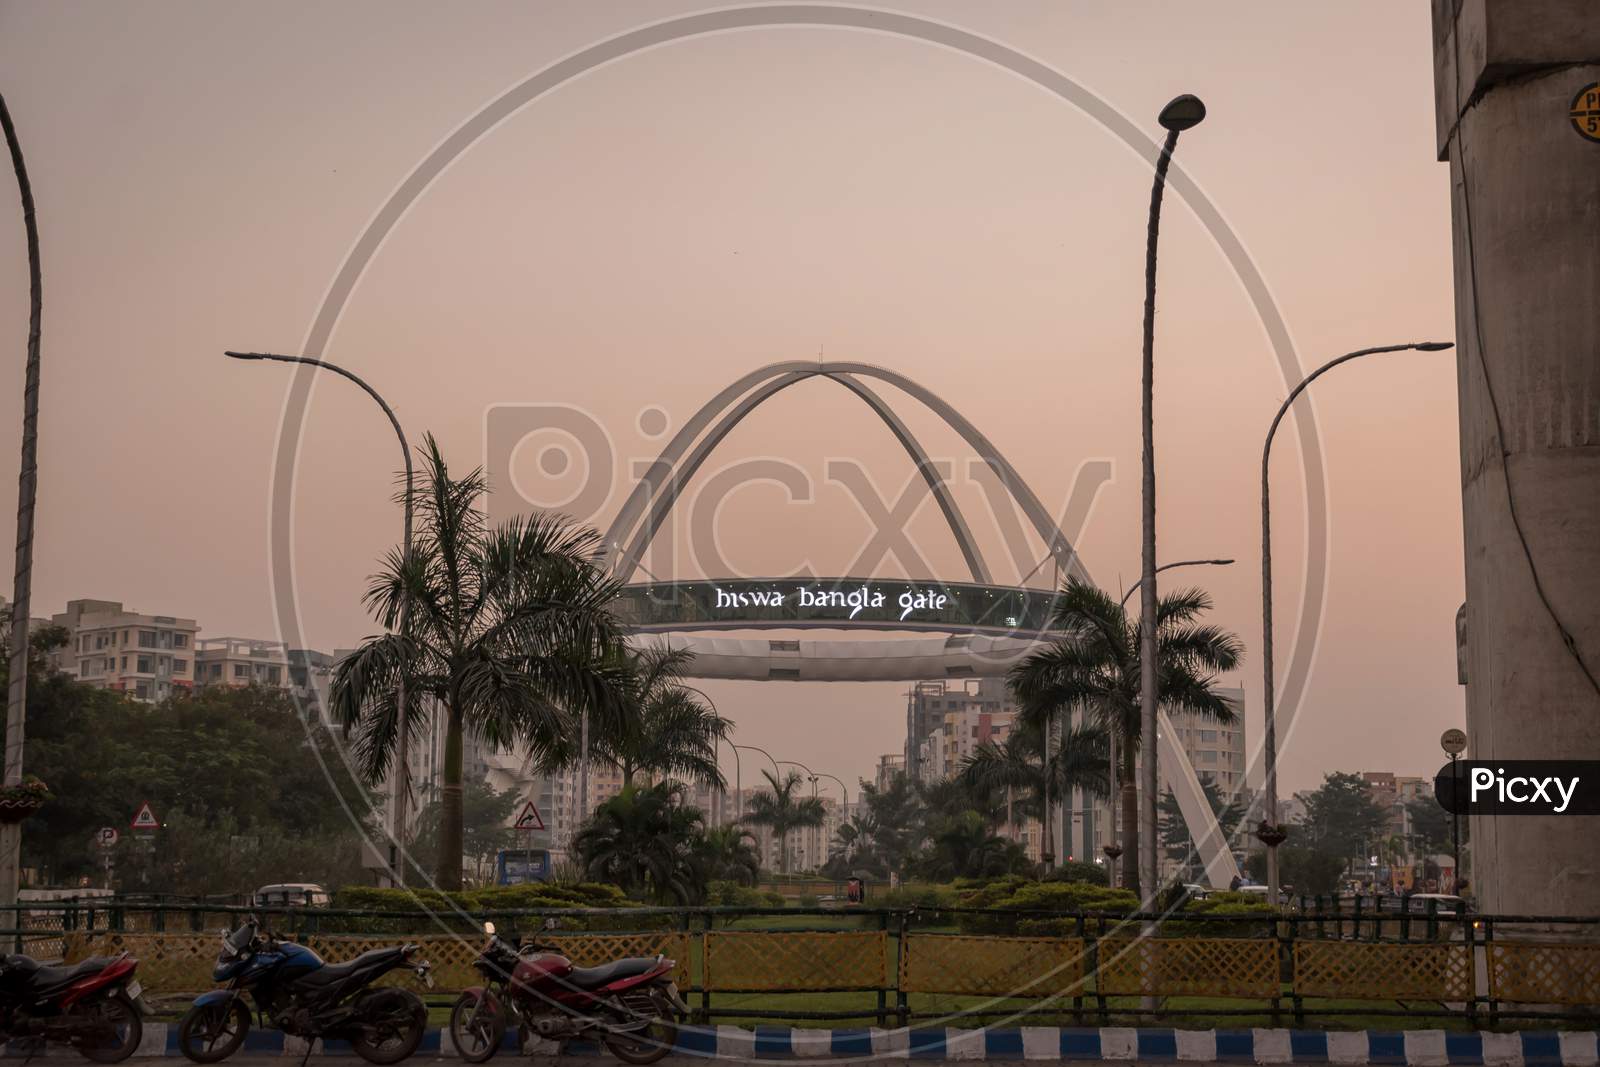 Biswa Bangla Gate, The Gateway To This City Of Joy Has A Restaurant That Will Host The City’S Very First Hanging Restaurant Offering You 360-Degree Views Of The City. Newtown, India On December 2019